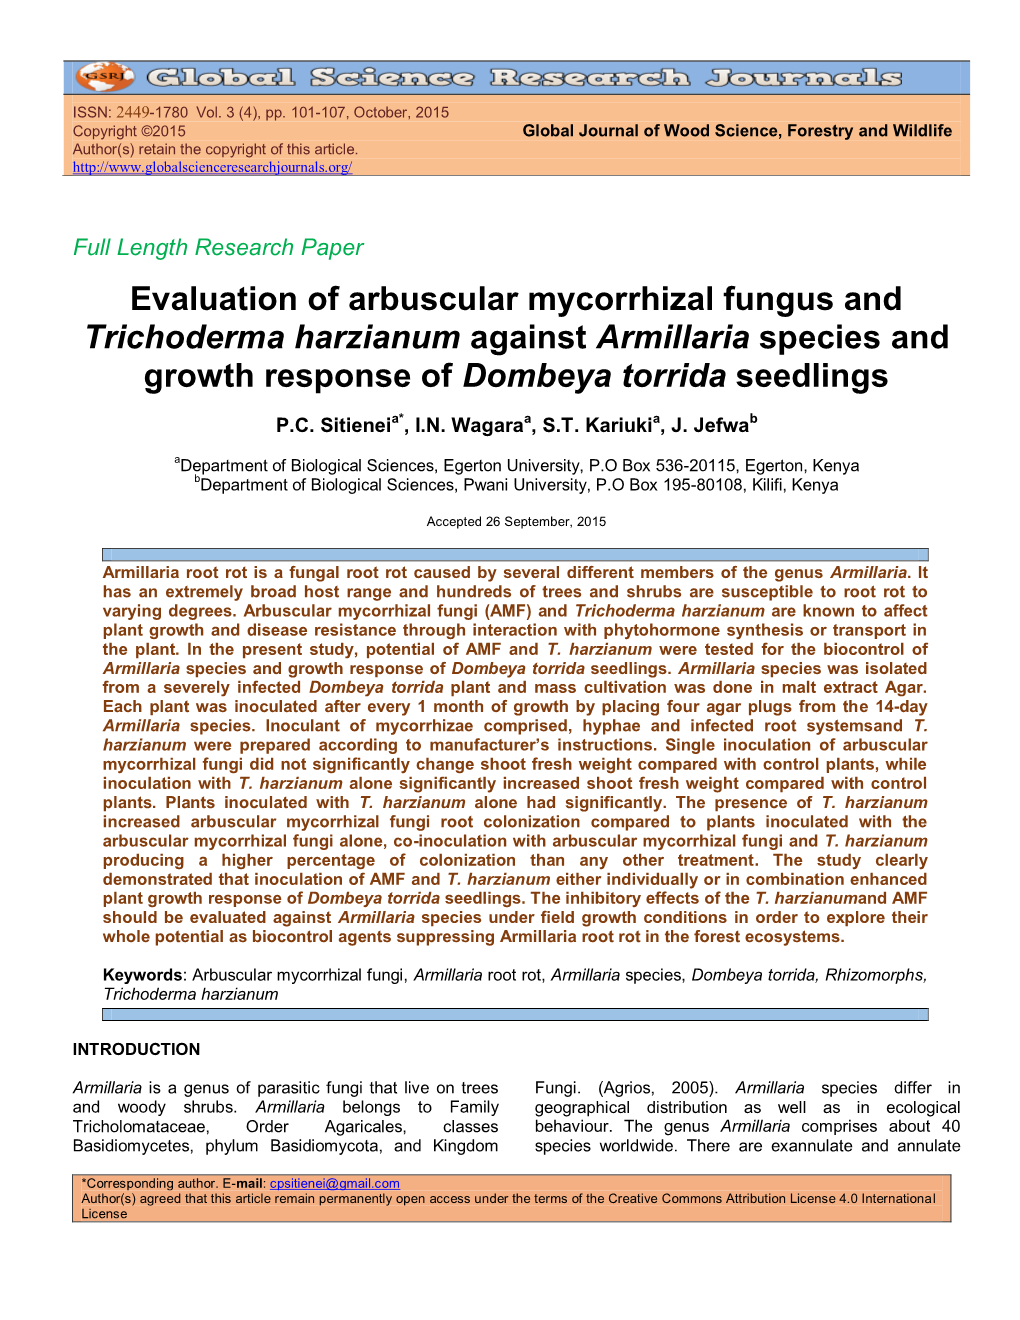 Evaluation of Arbuscular Mycorrhizal Fungus and Trichoderma Harzianum Against Armillaria Species and Growth Response of Dombeya Torrida Seedlings